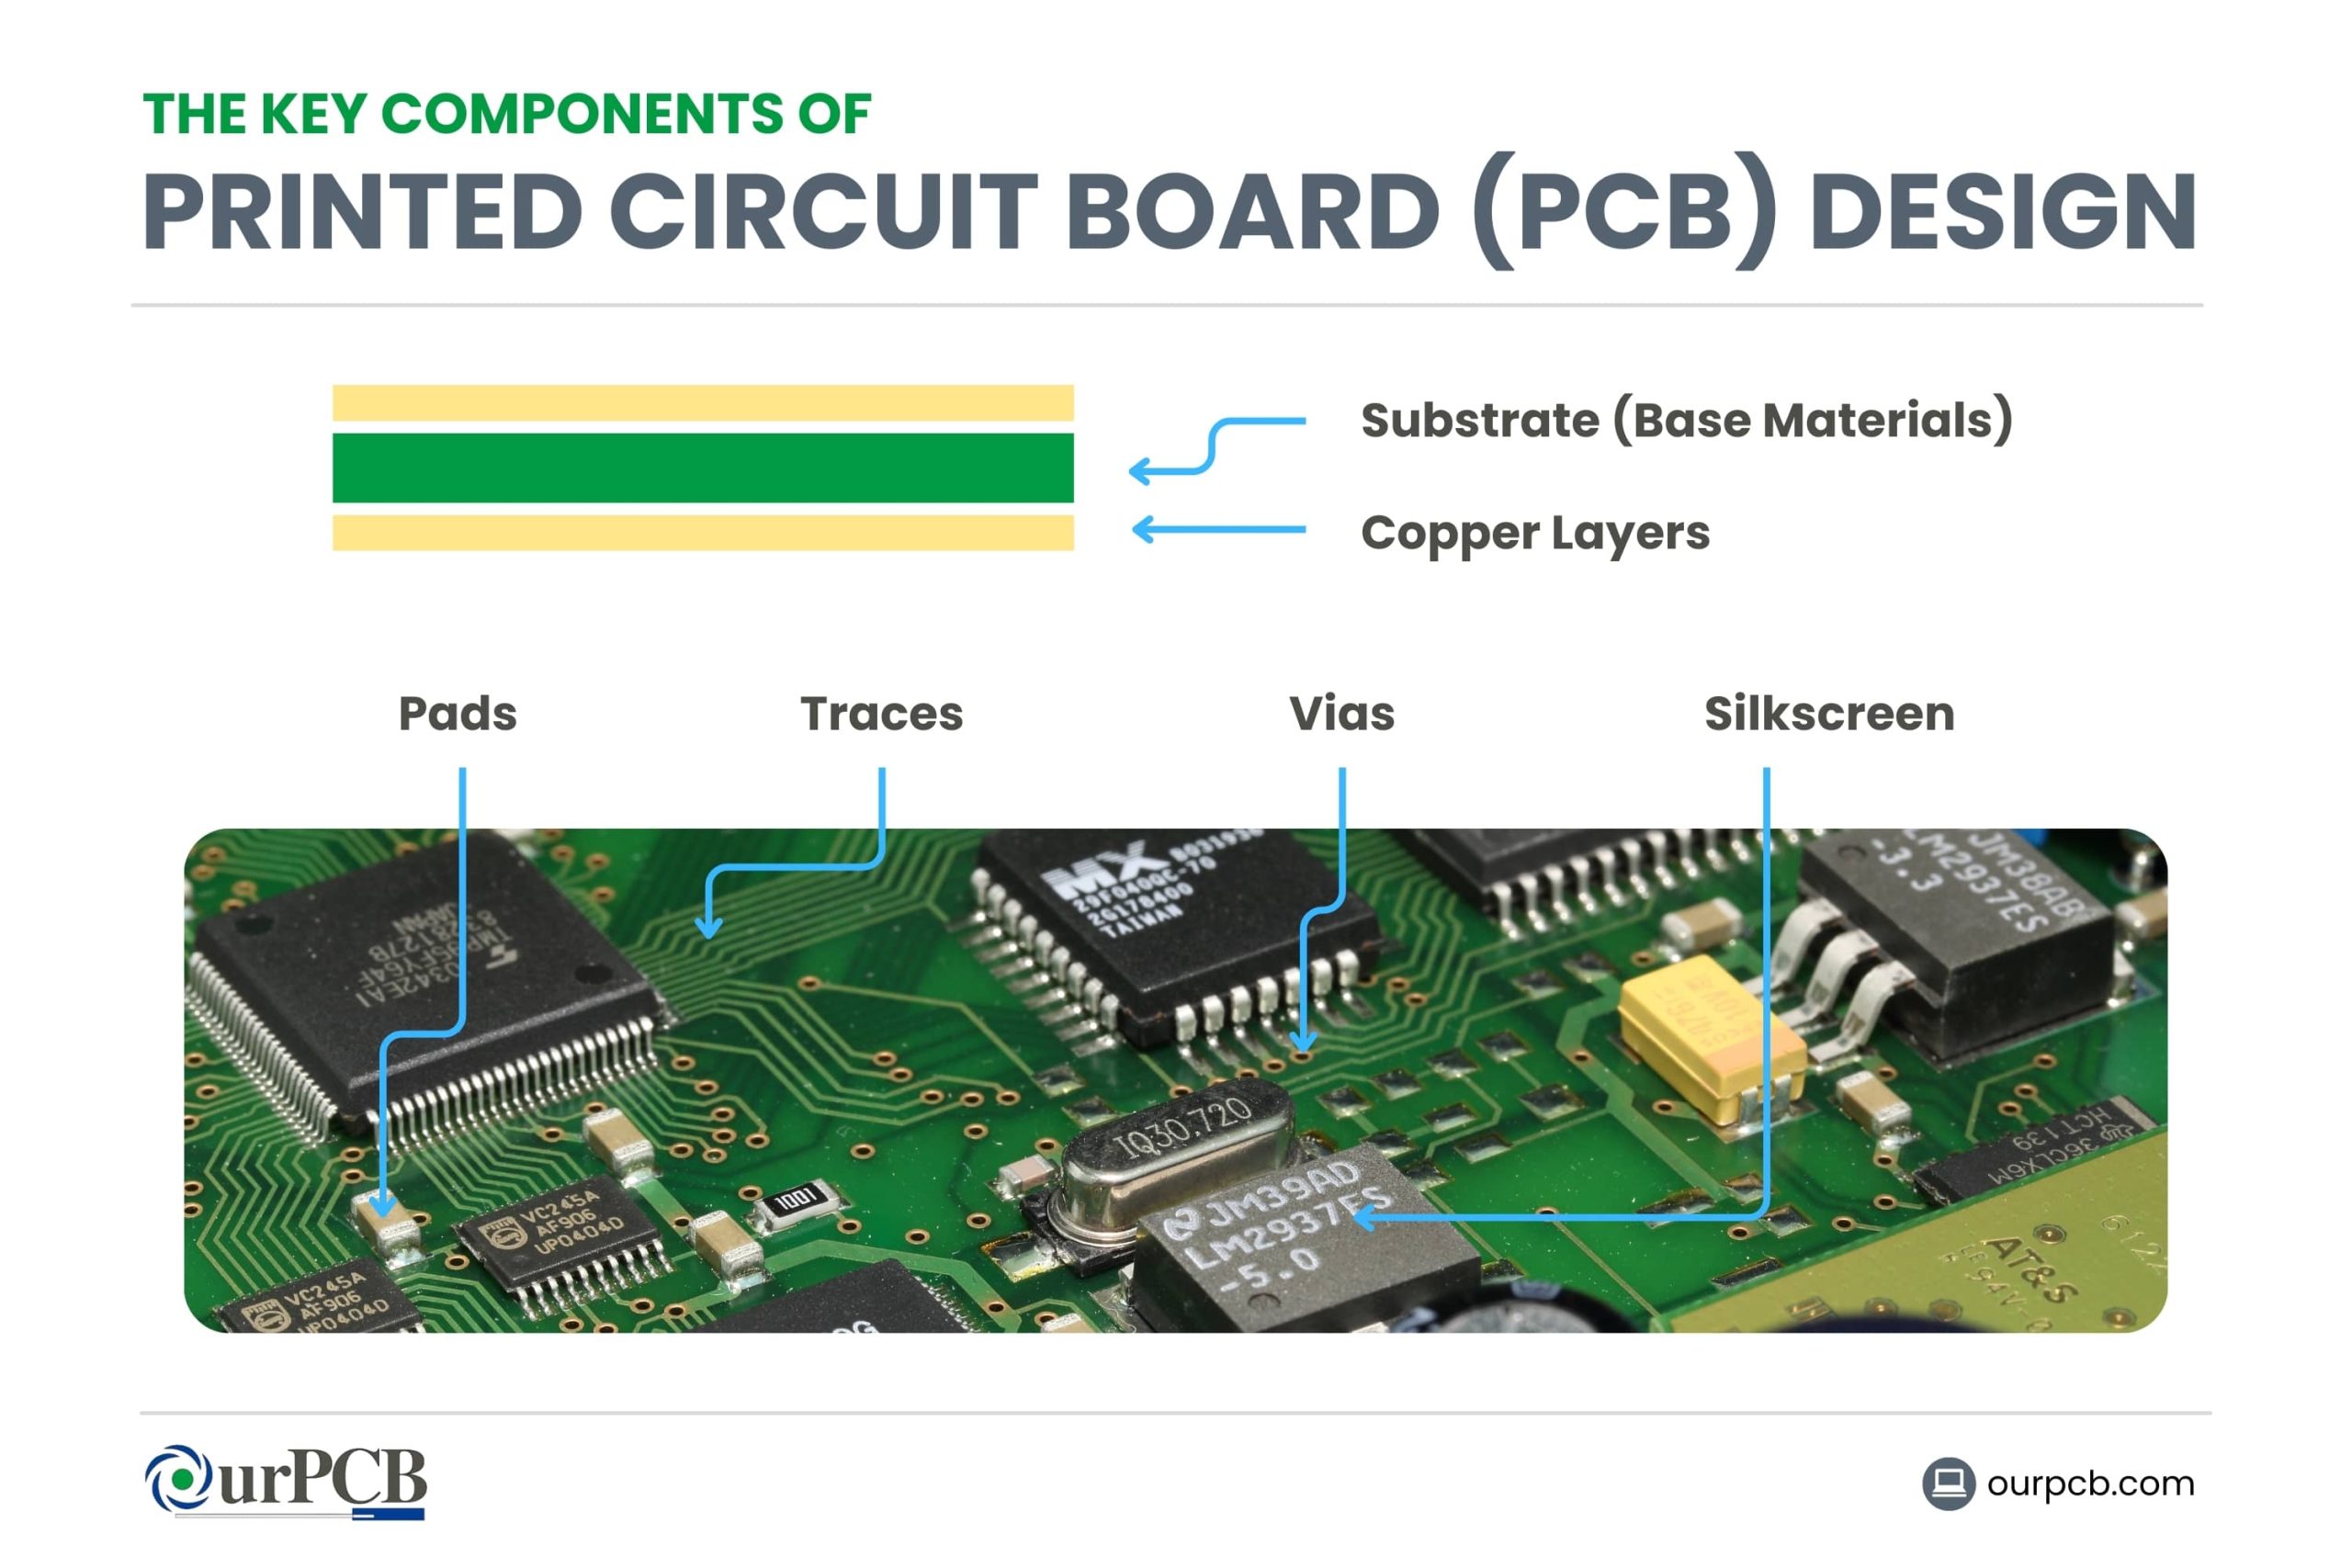 What are the Key Components of PCB Design?